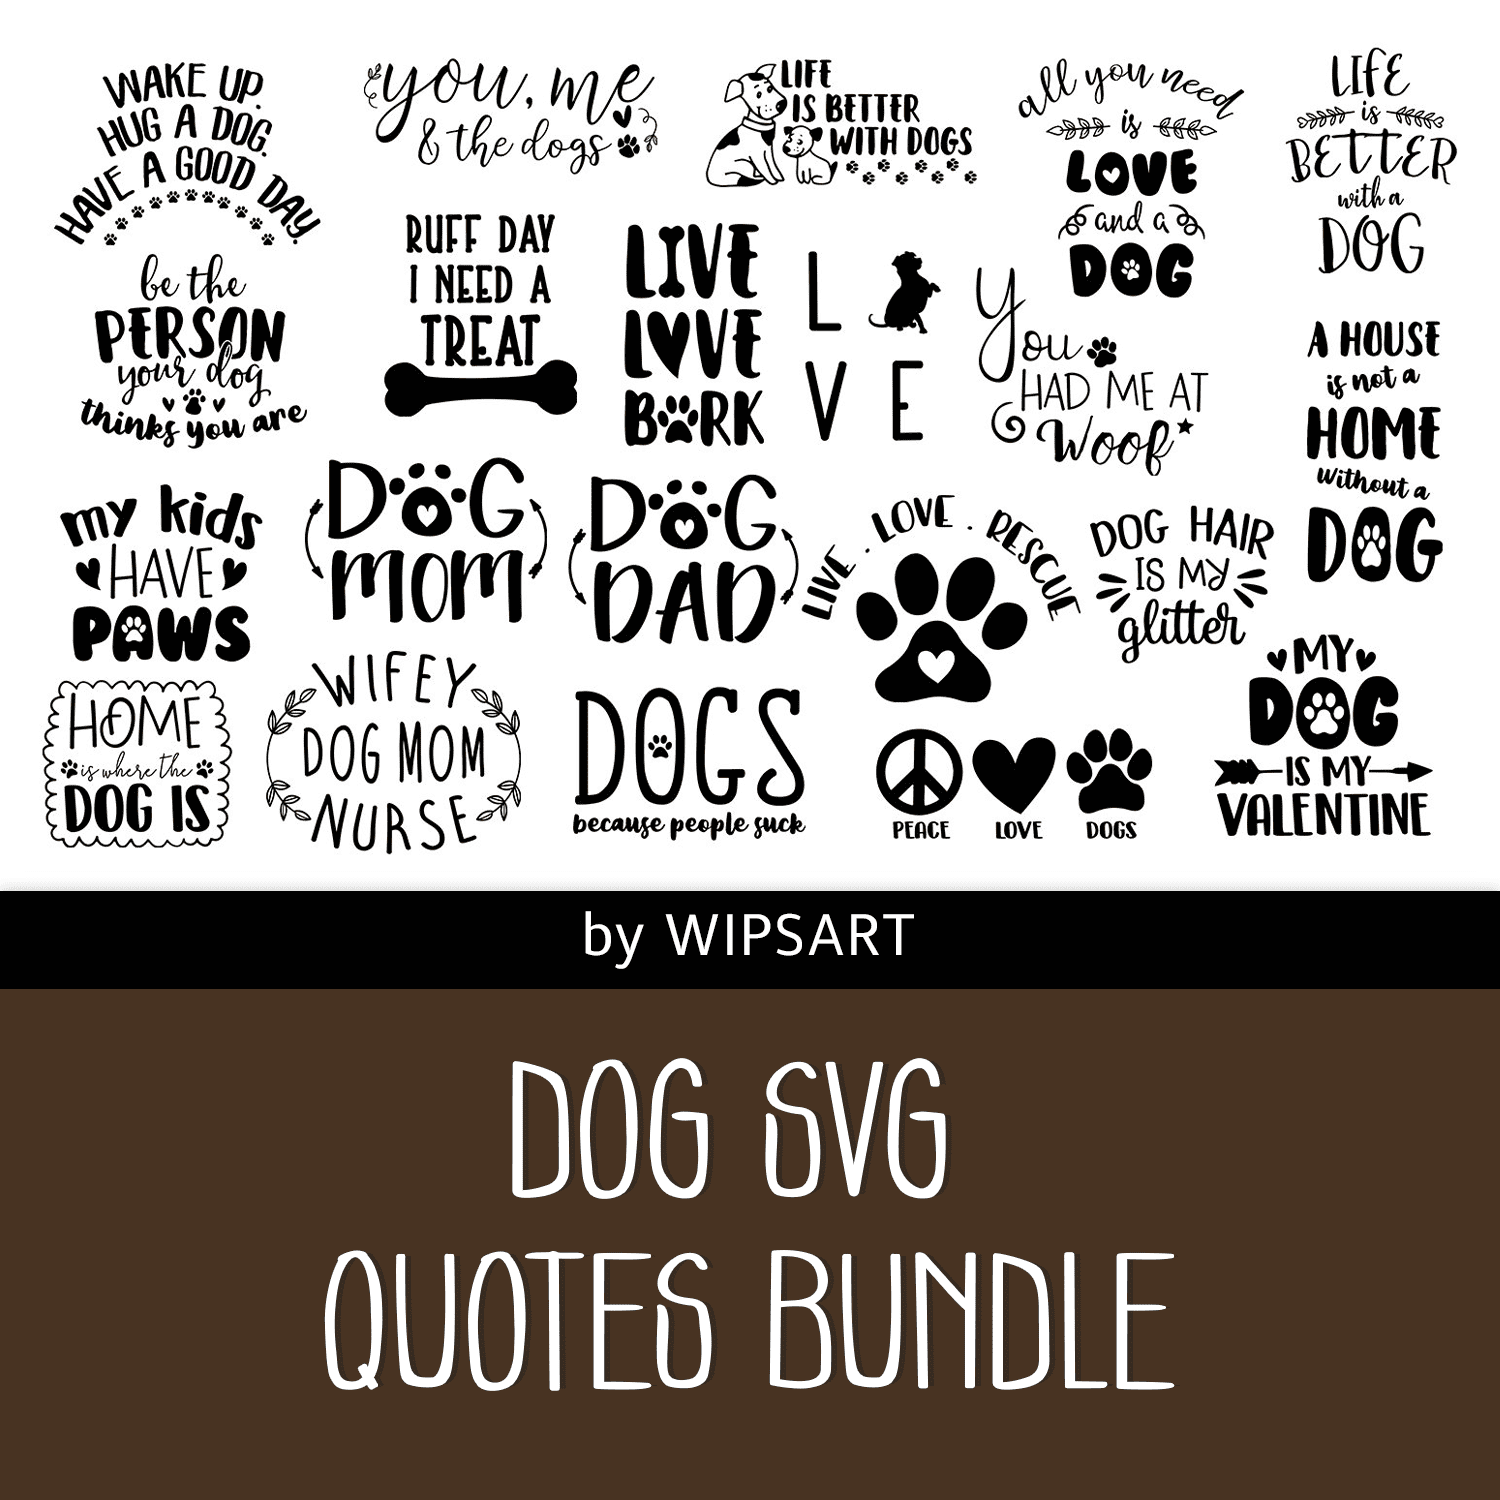 Set of dog svg quotes and sayings.